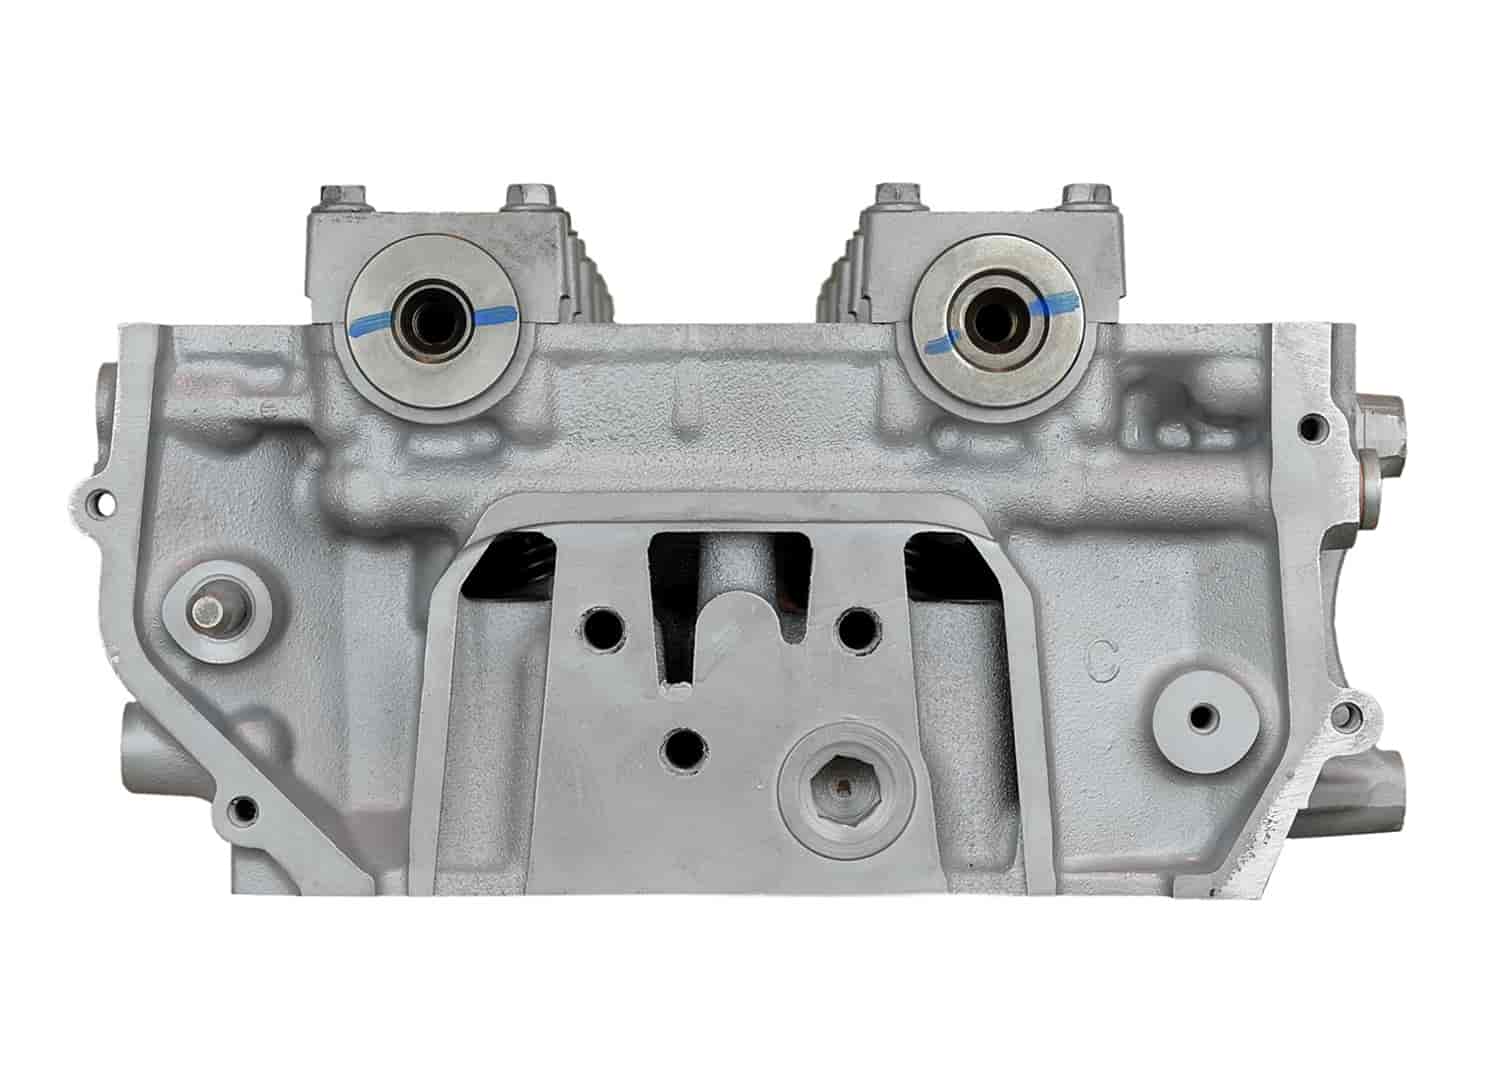 Remanufactured Cylinder Head for 2003-2008 Ford/Mazda with 2.3L L4